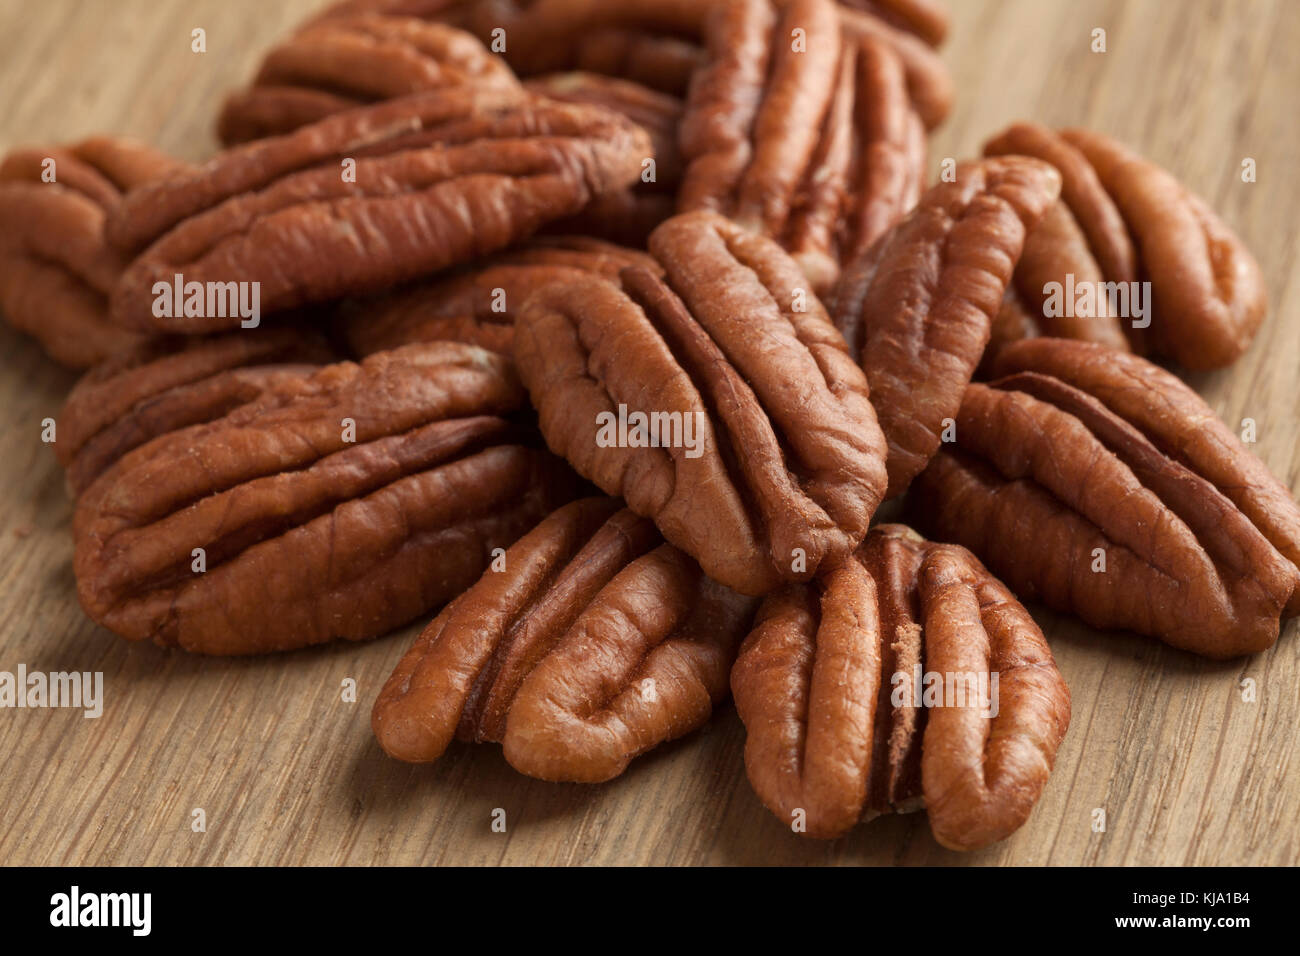 Heap of peeled pecan nuts close up Stock Photo